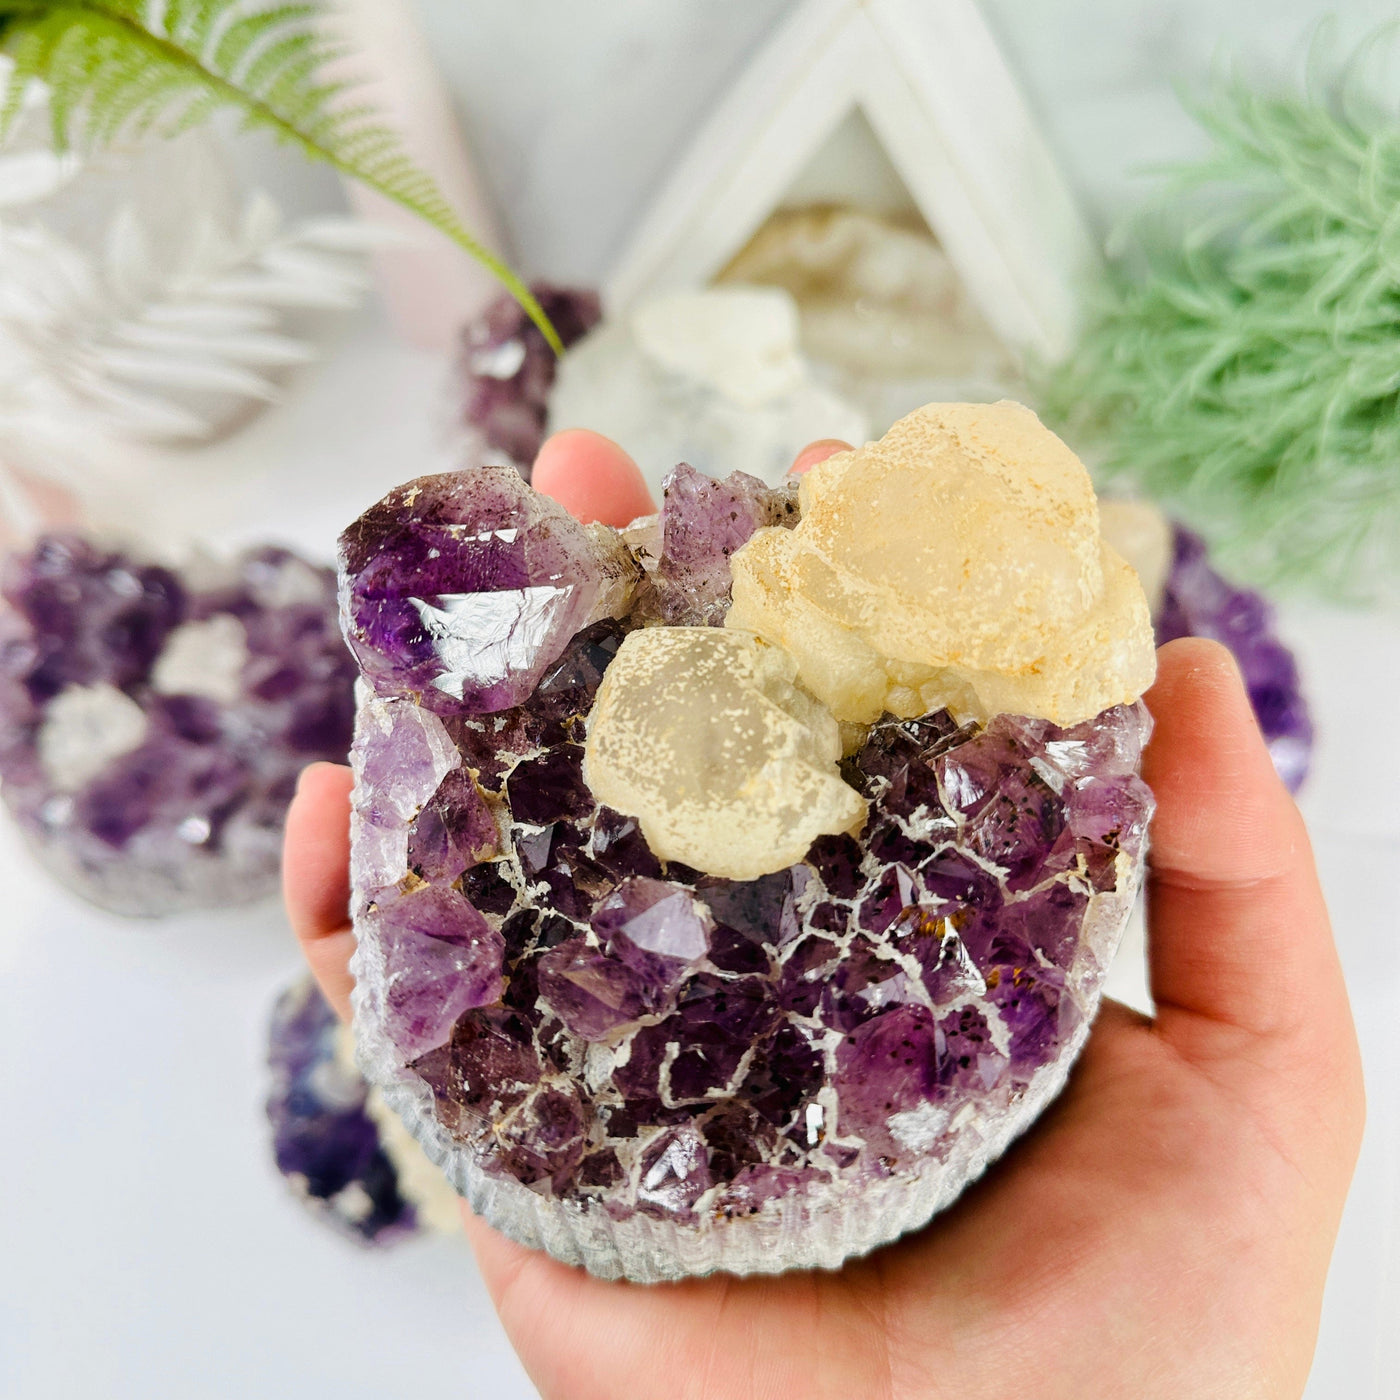 Amethyst Crystal Clusters - You Choose variant A in hand for size reference